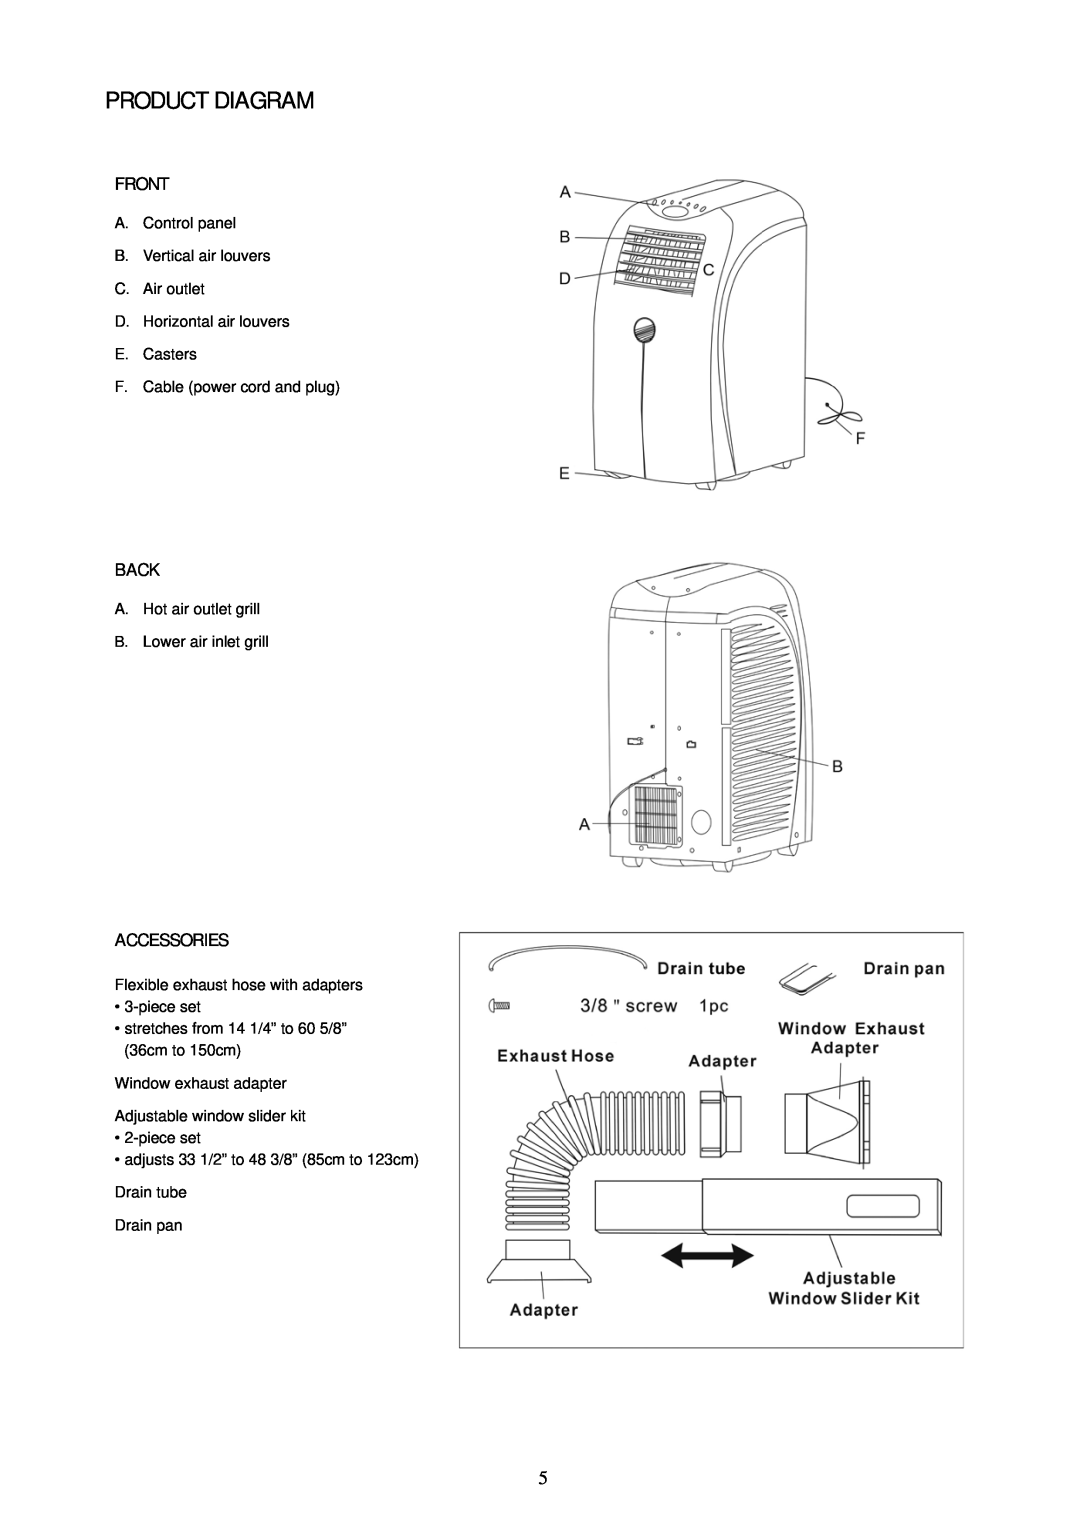 Soleus Air 000 BTU Evaporative Portable Air Conditioner and 14, KY-36 owner manual Product Diagram, Front, Back, Accessories 